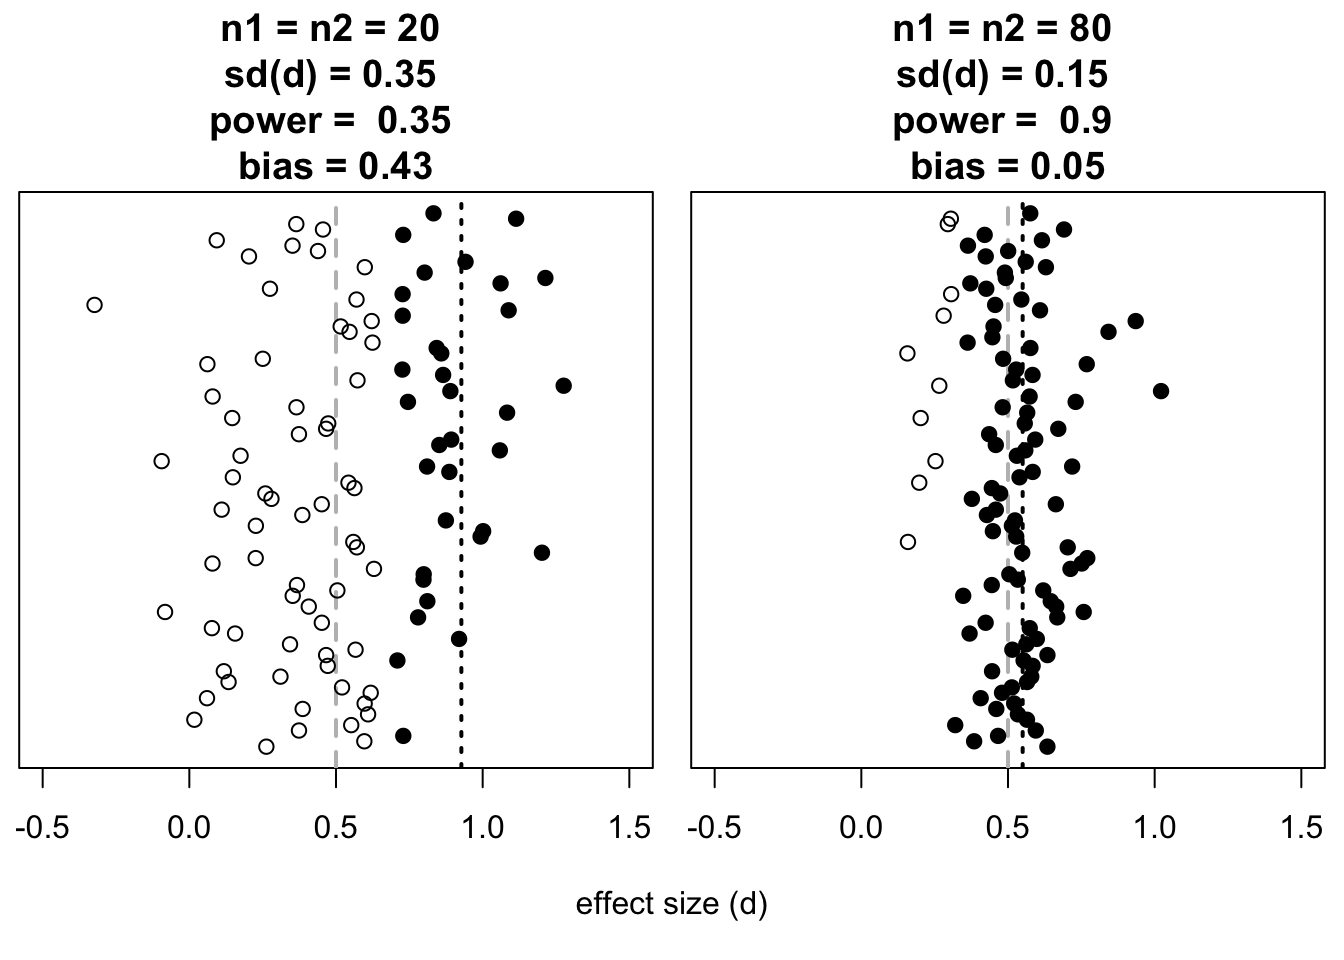 Effect sizes (along the horizontal axis) found in simulated experiments (two-sided t-test for independent observations, alpha=.05), broken down according to sample size (left $n=20$, right $n=80$) and according to testing result (dark symbols: significant; light symbols: not significant). The true effect size between groups is always $d=0.5$, indicated by the grey dashed line. The mean effect size found from the significant outcomes is referred to with the black dashed line. For each sample size, 100 simulations have been carried out (long vertical axis).